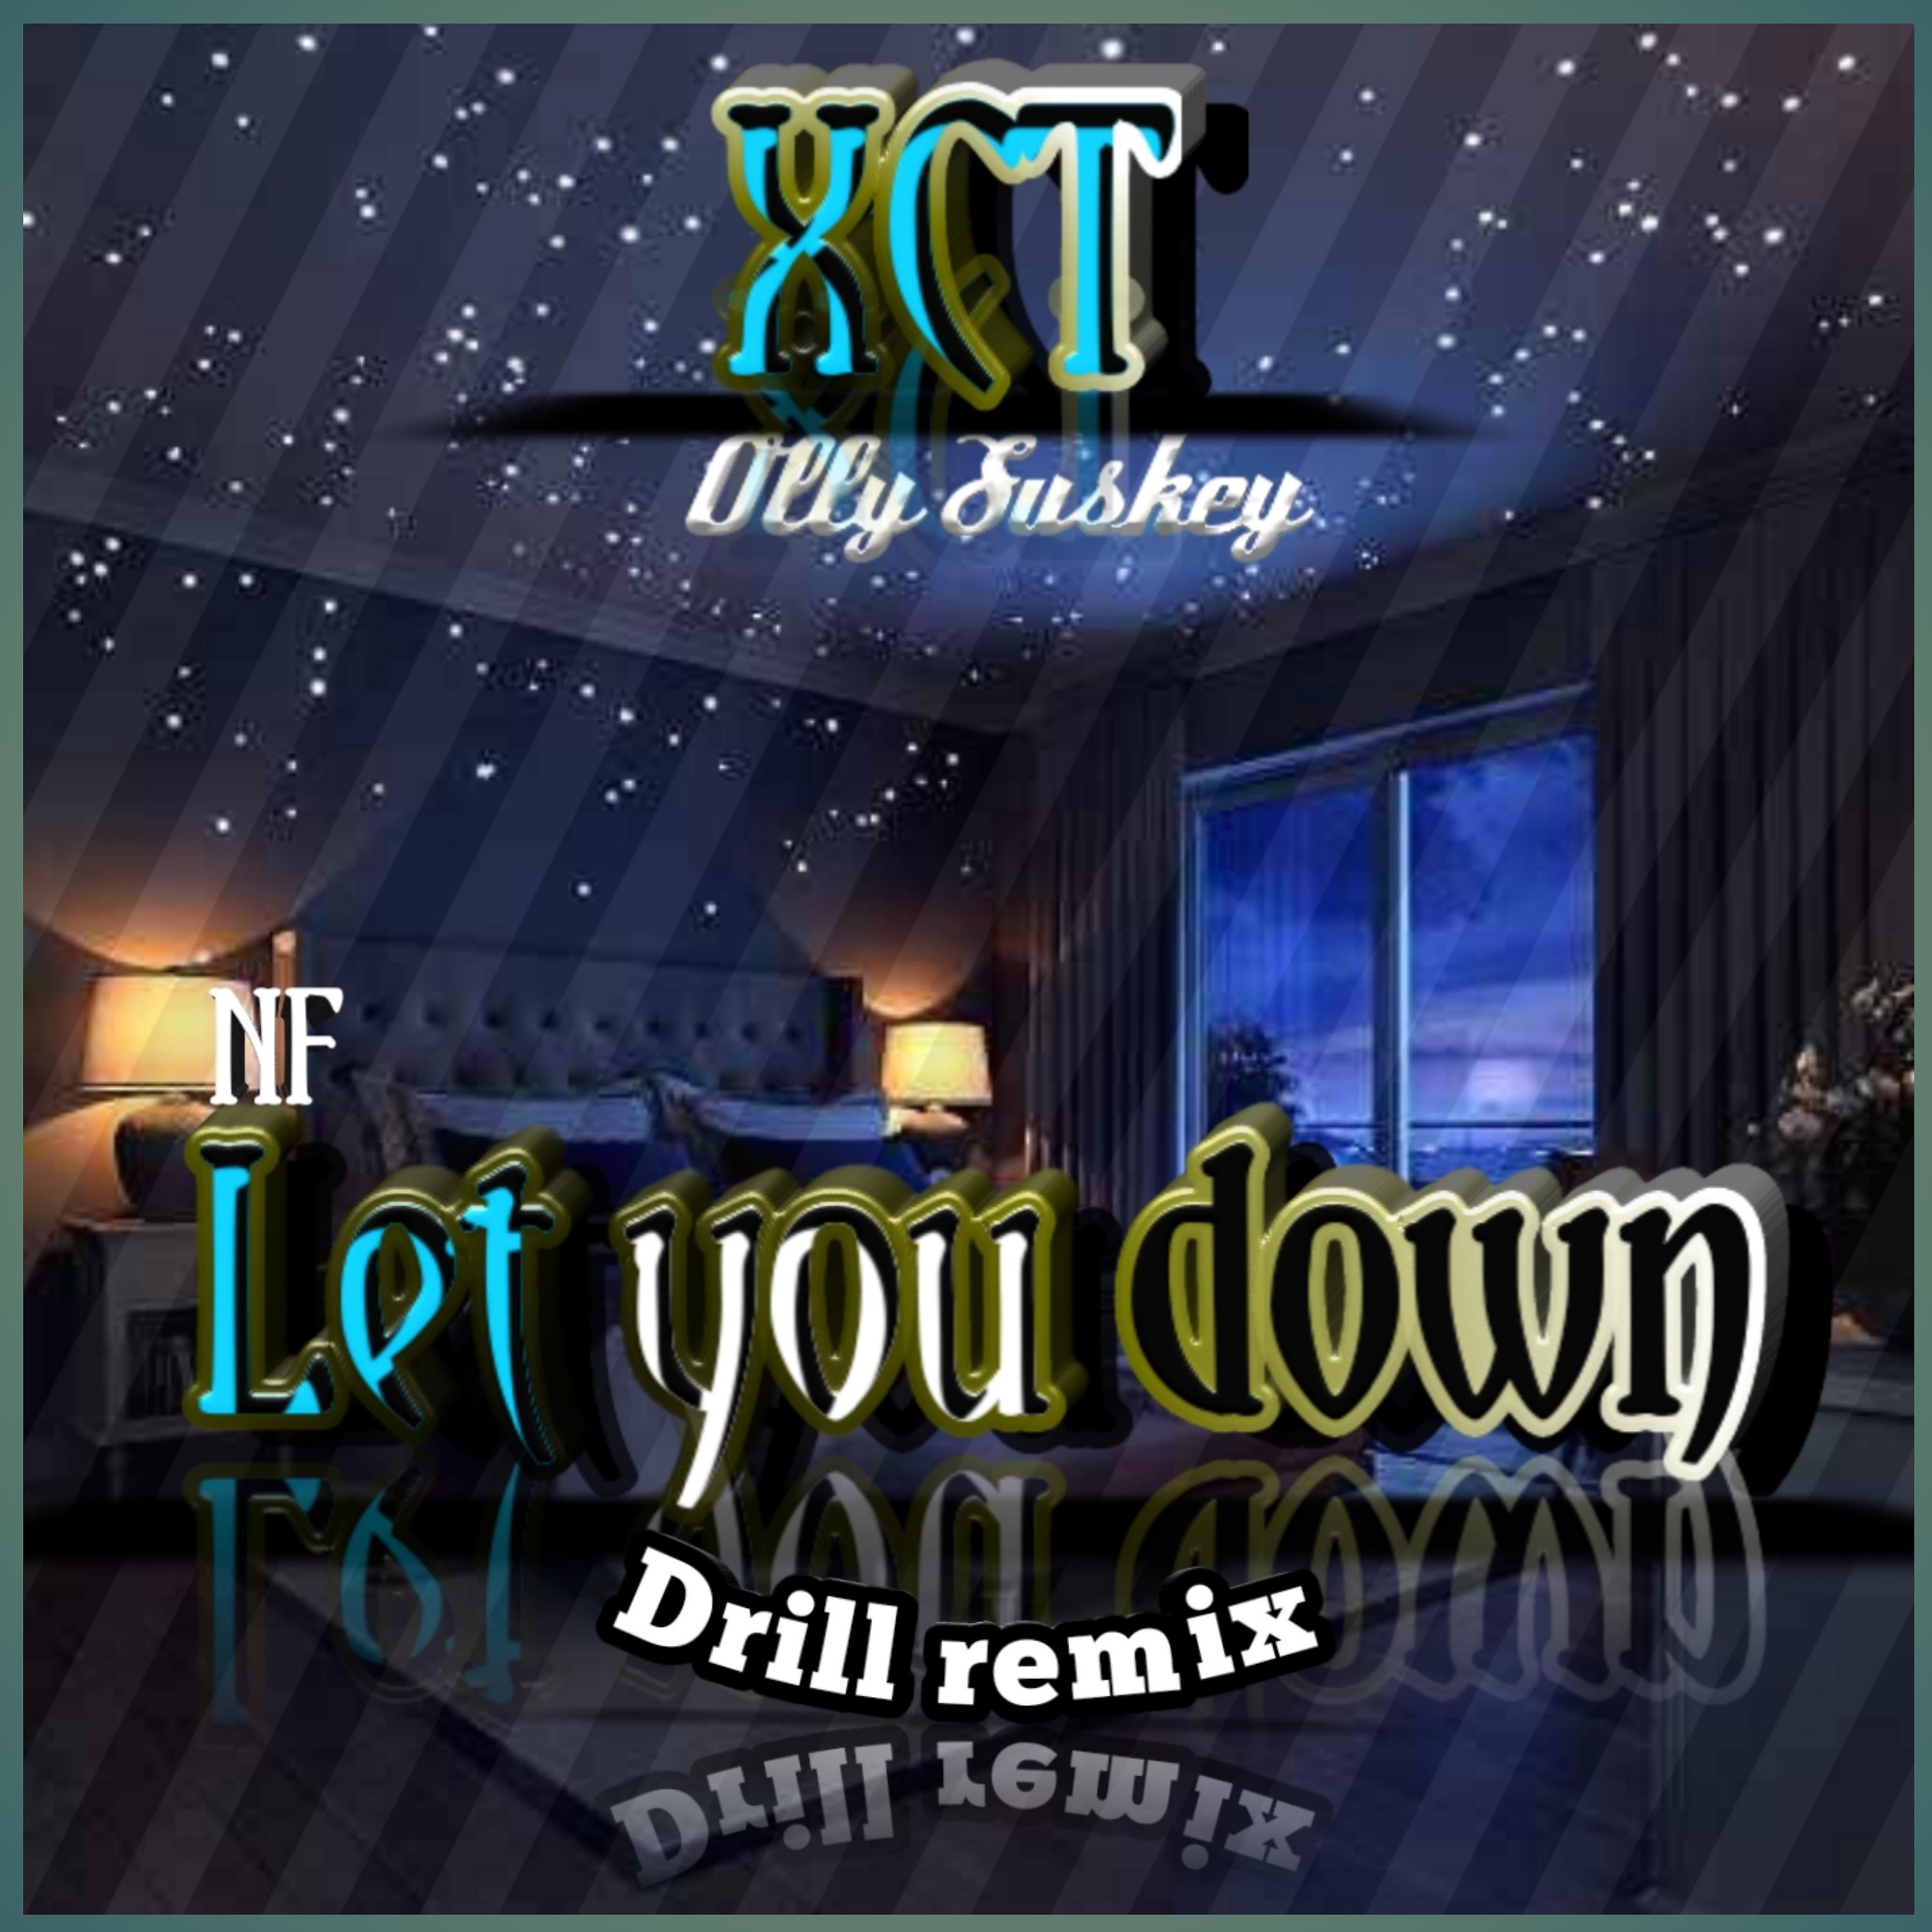 Постер альбома Nf Let you down drill remix